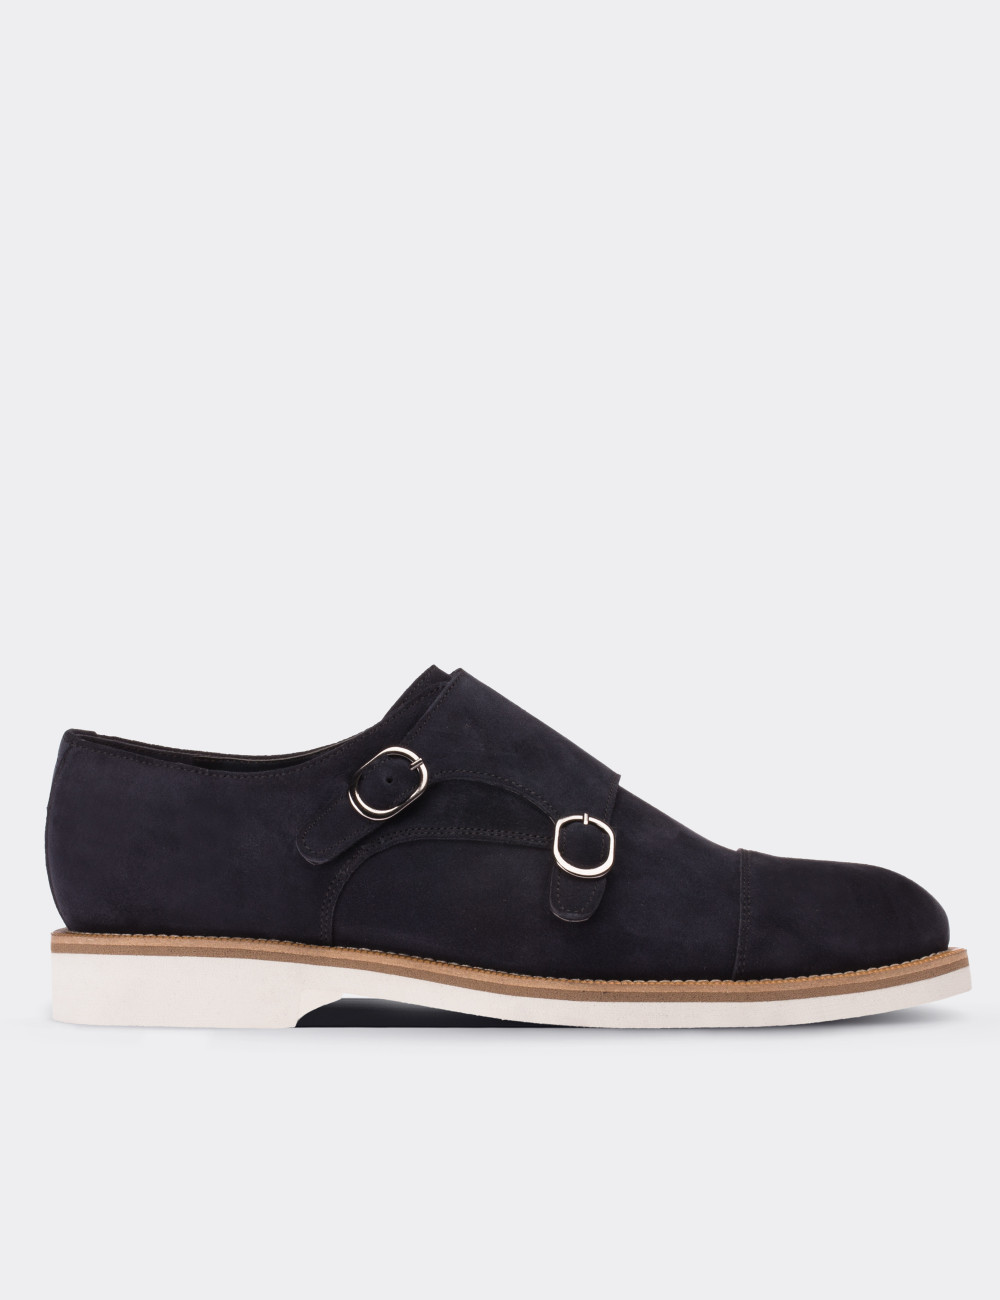 Navy Suede Leather Monk Straps Shoes - 01566MLCVE02